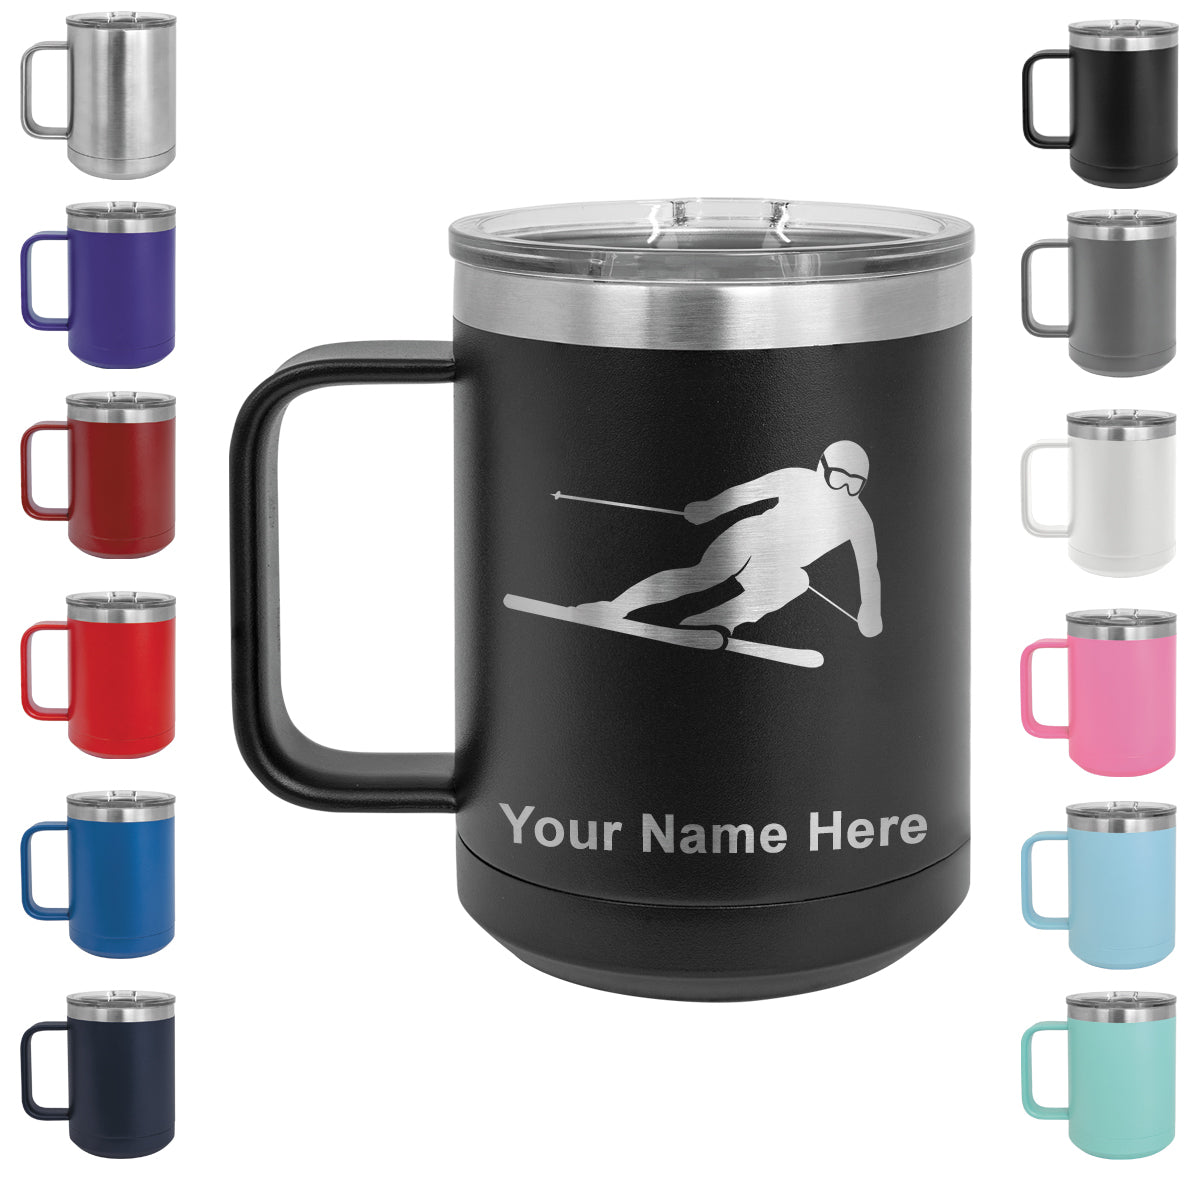 15oz Vacuum Insulated Coffee Mug, Skier Downhill, Personalized Engraving Included